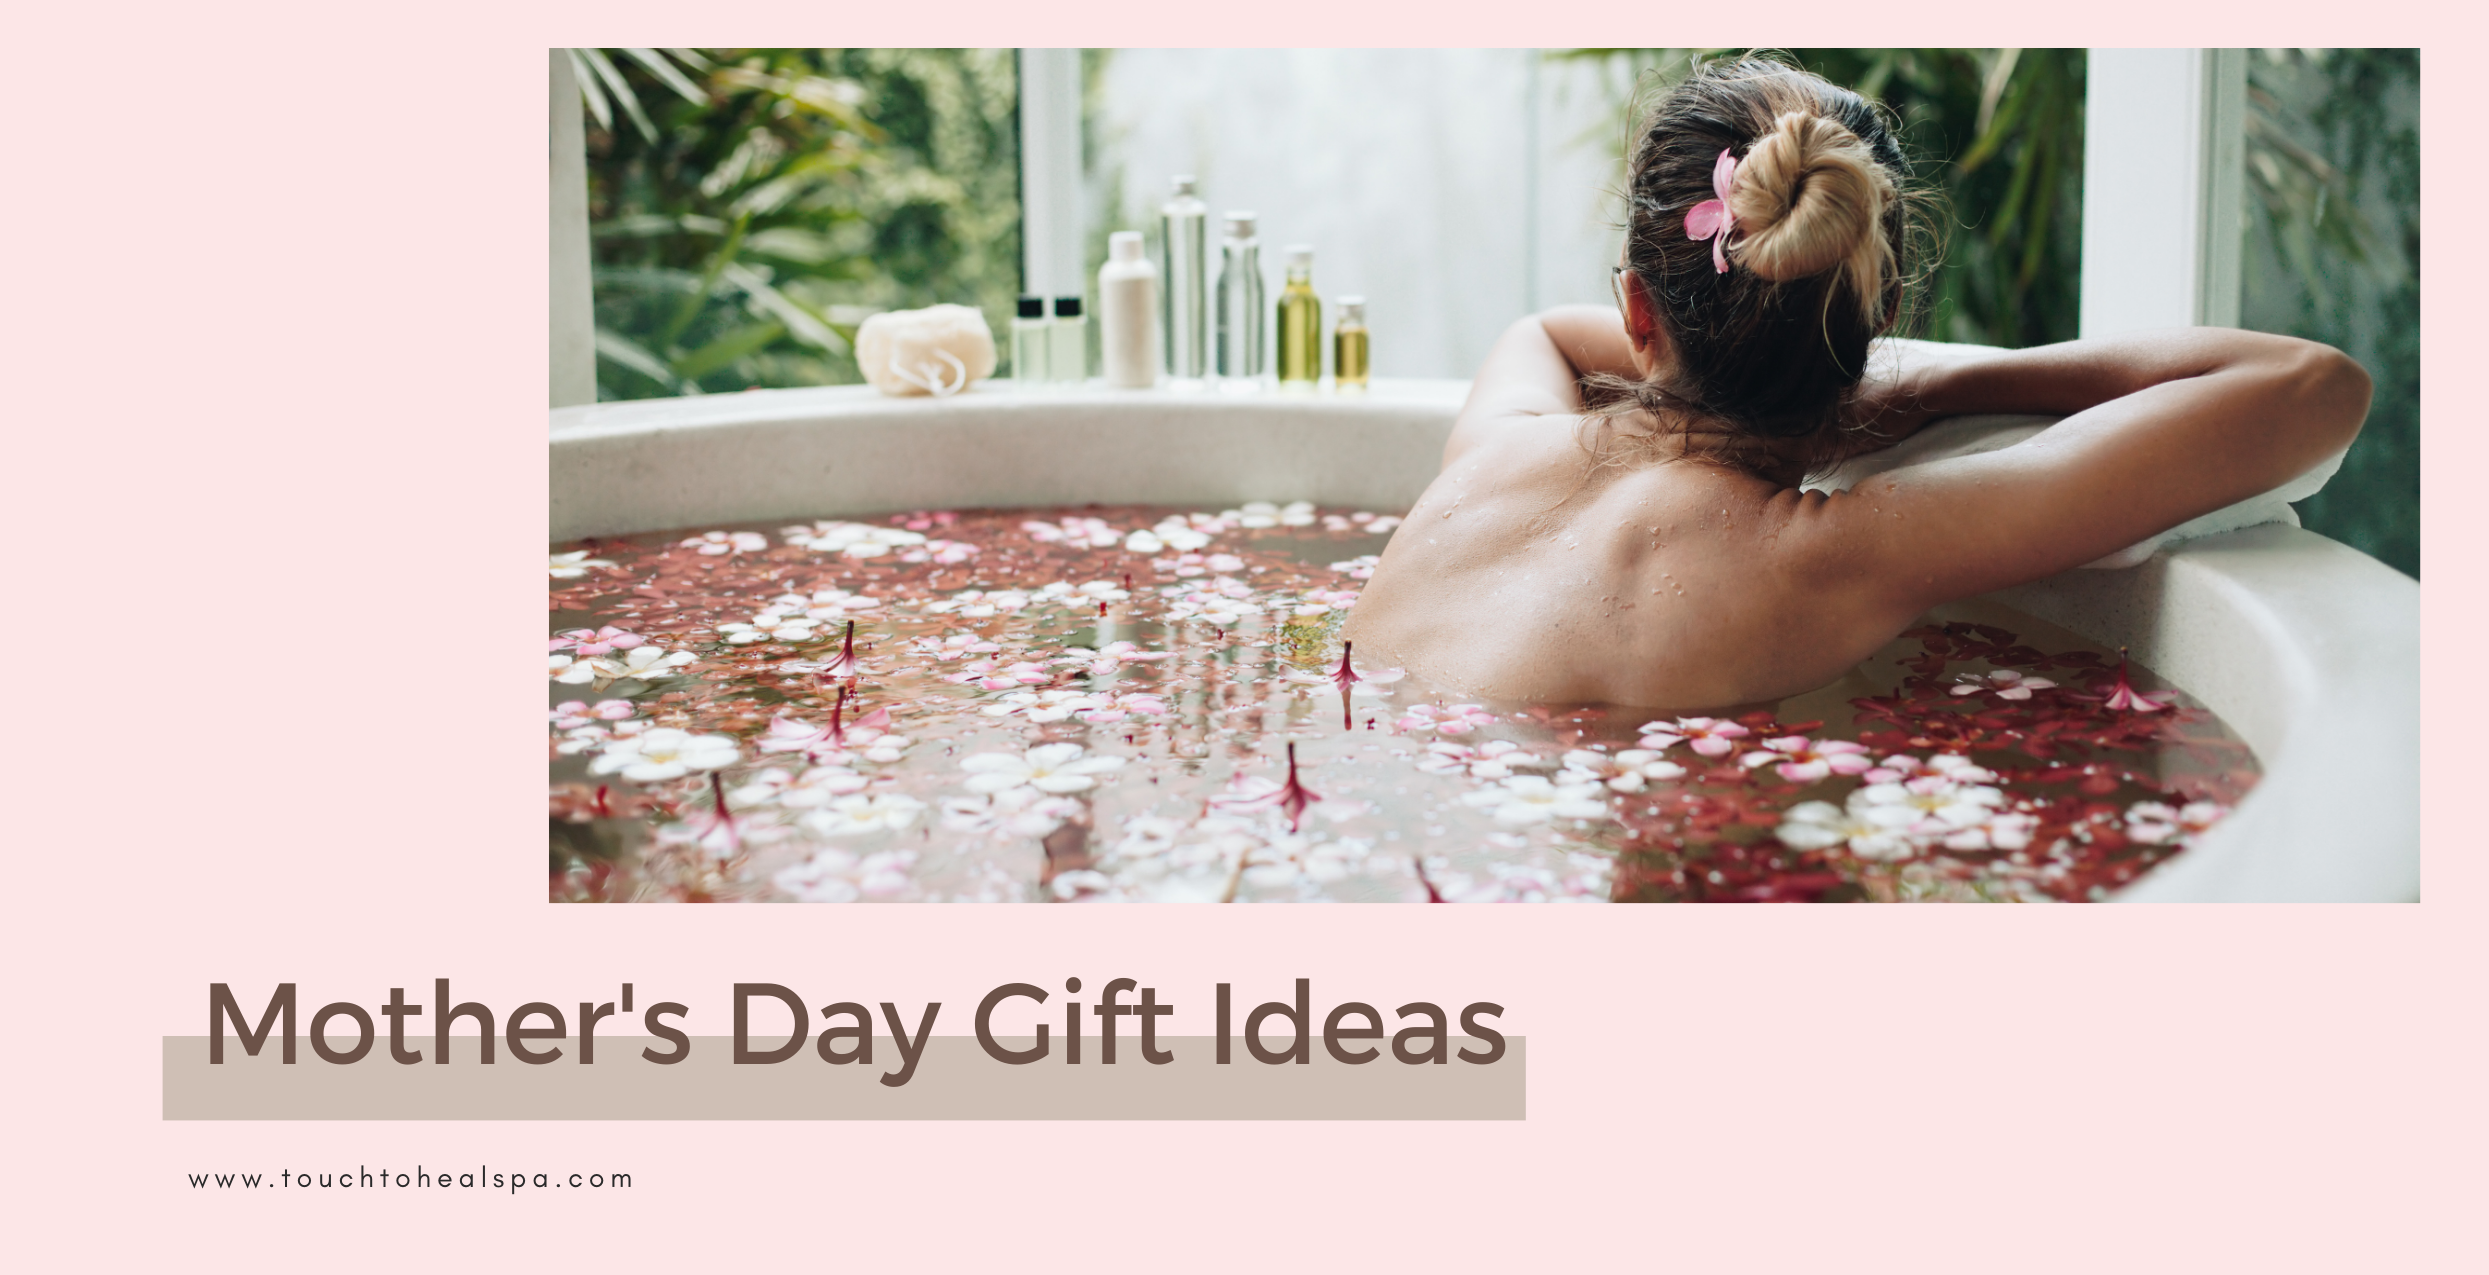 Pamper Mom: Best Mother’s Day Gift Ideas - Touch To Heal Spa